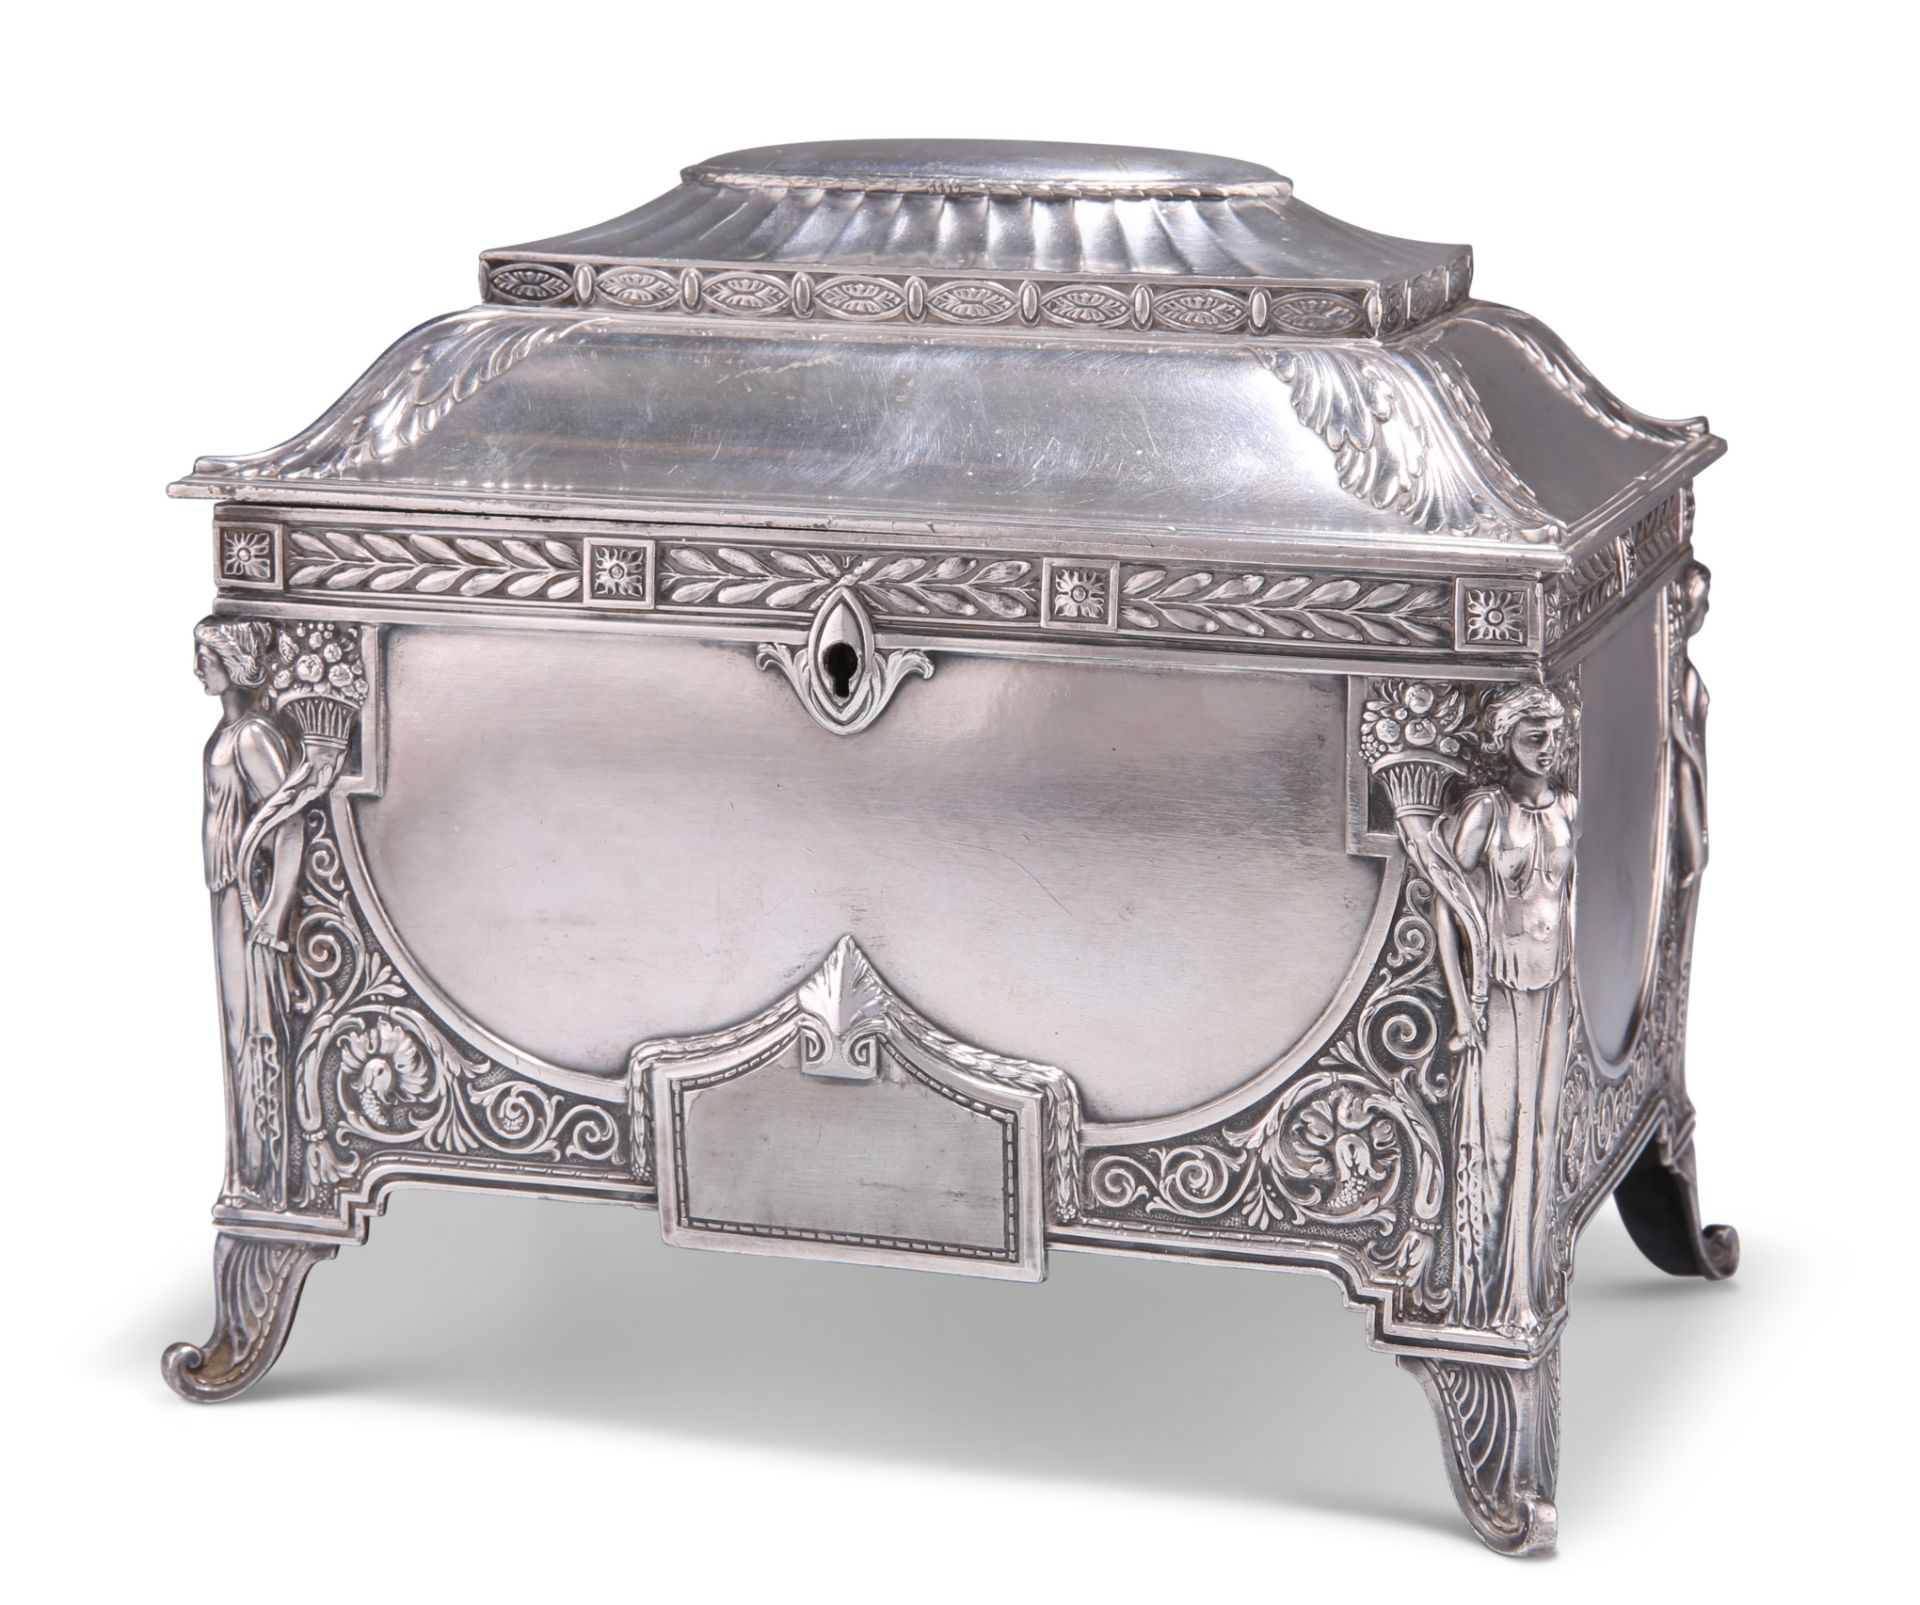 A GERMAN NEO-CLASSICAL REVIVAL SILVER-PLATED CASKET